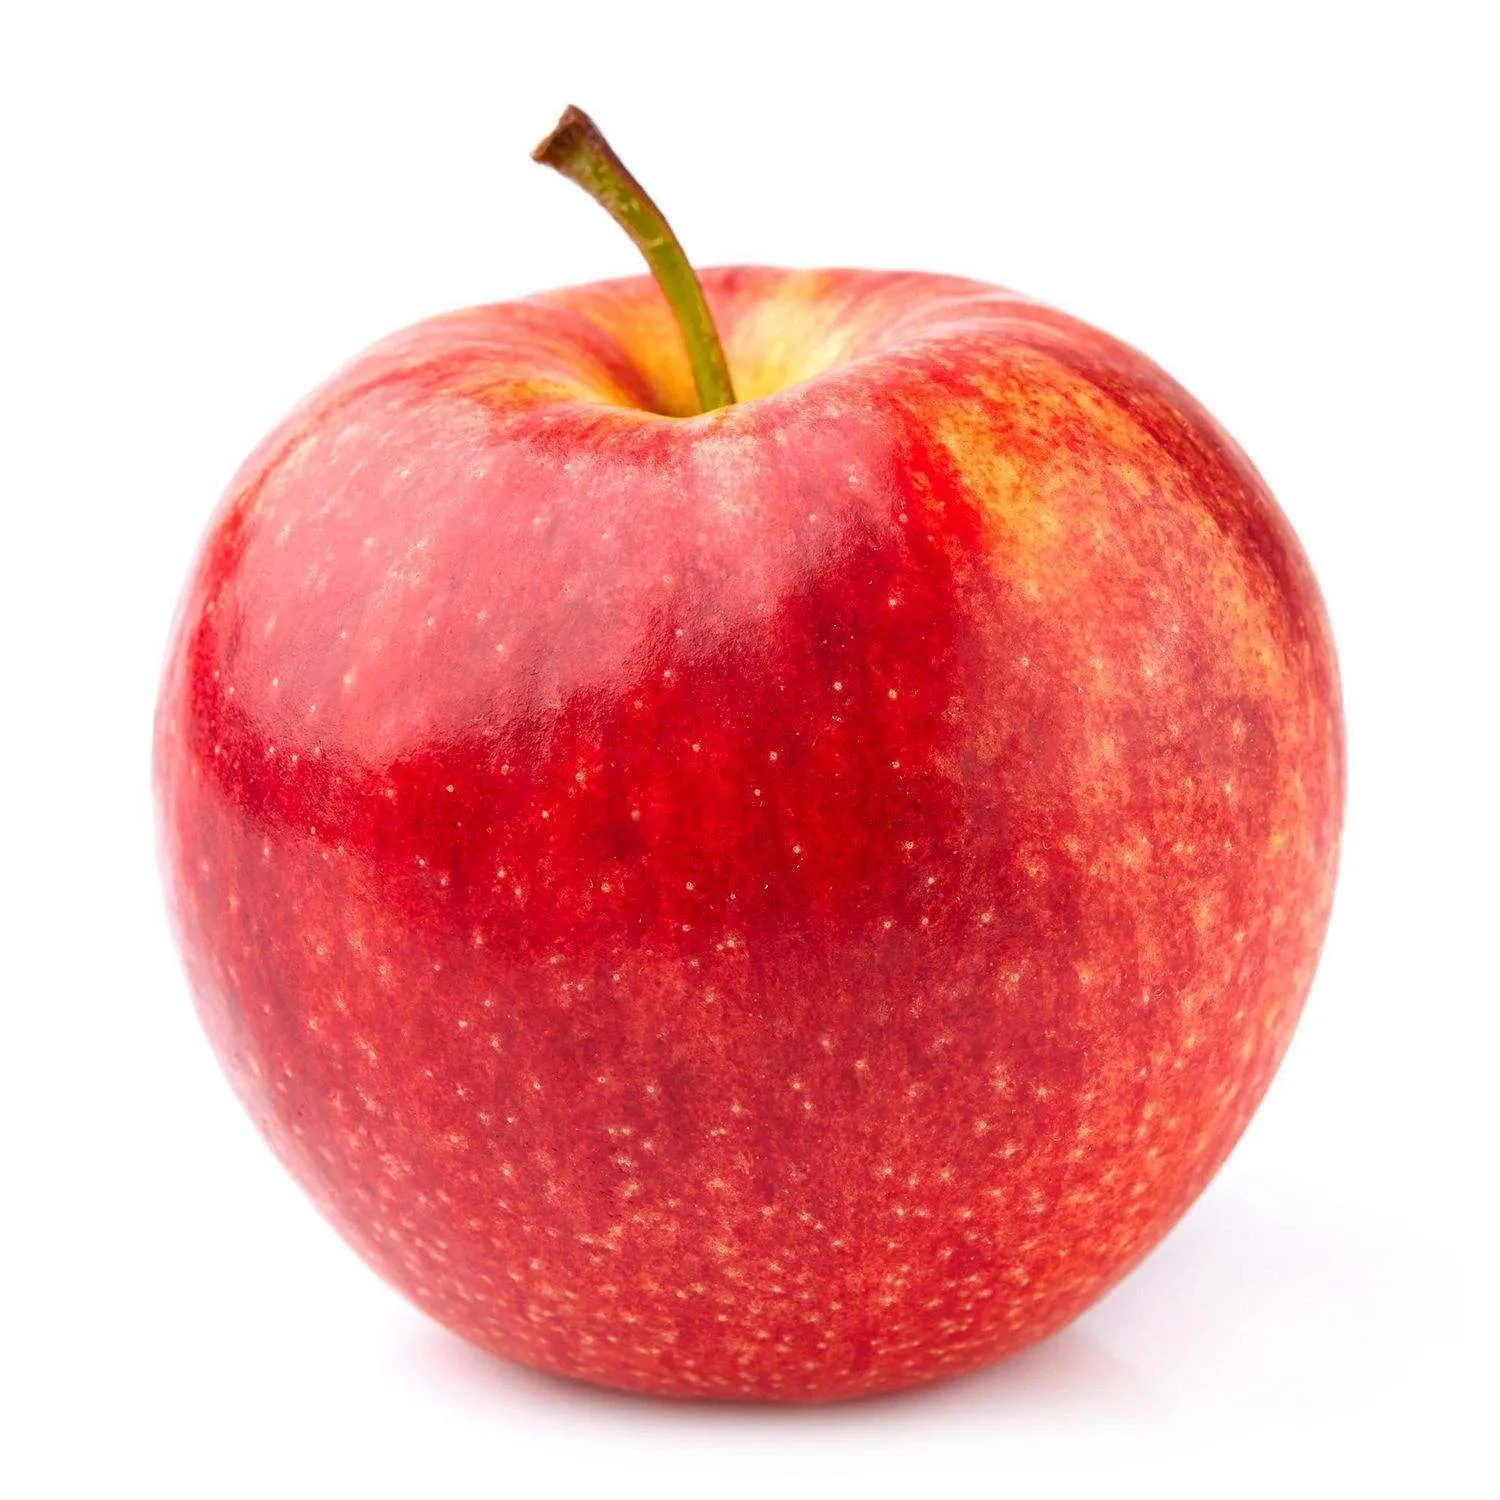 Buy red delicious apple + best price